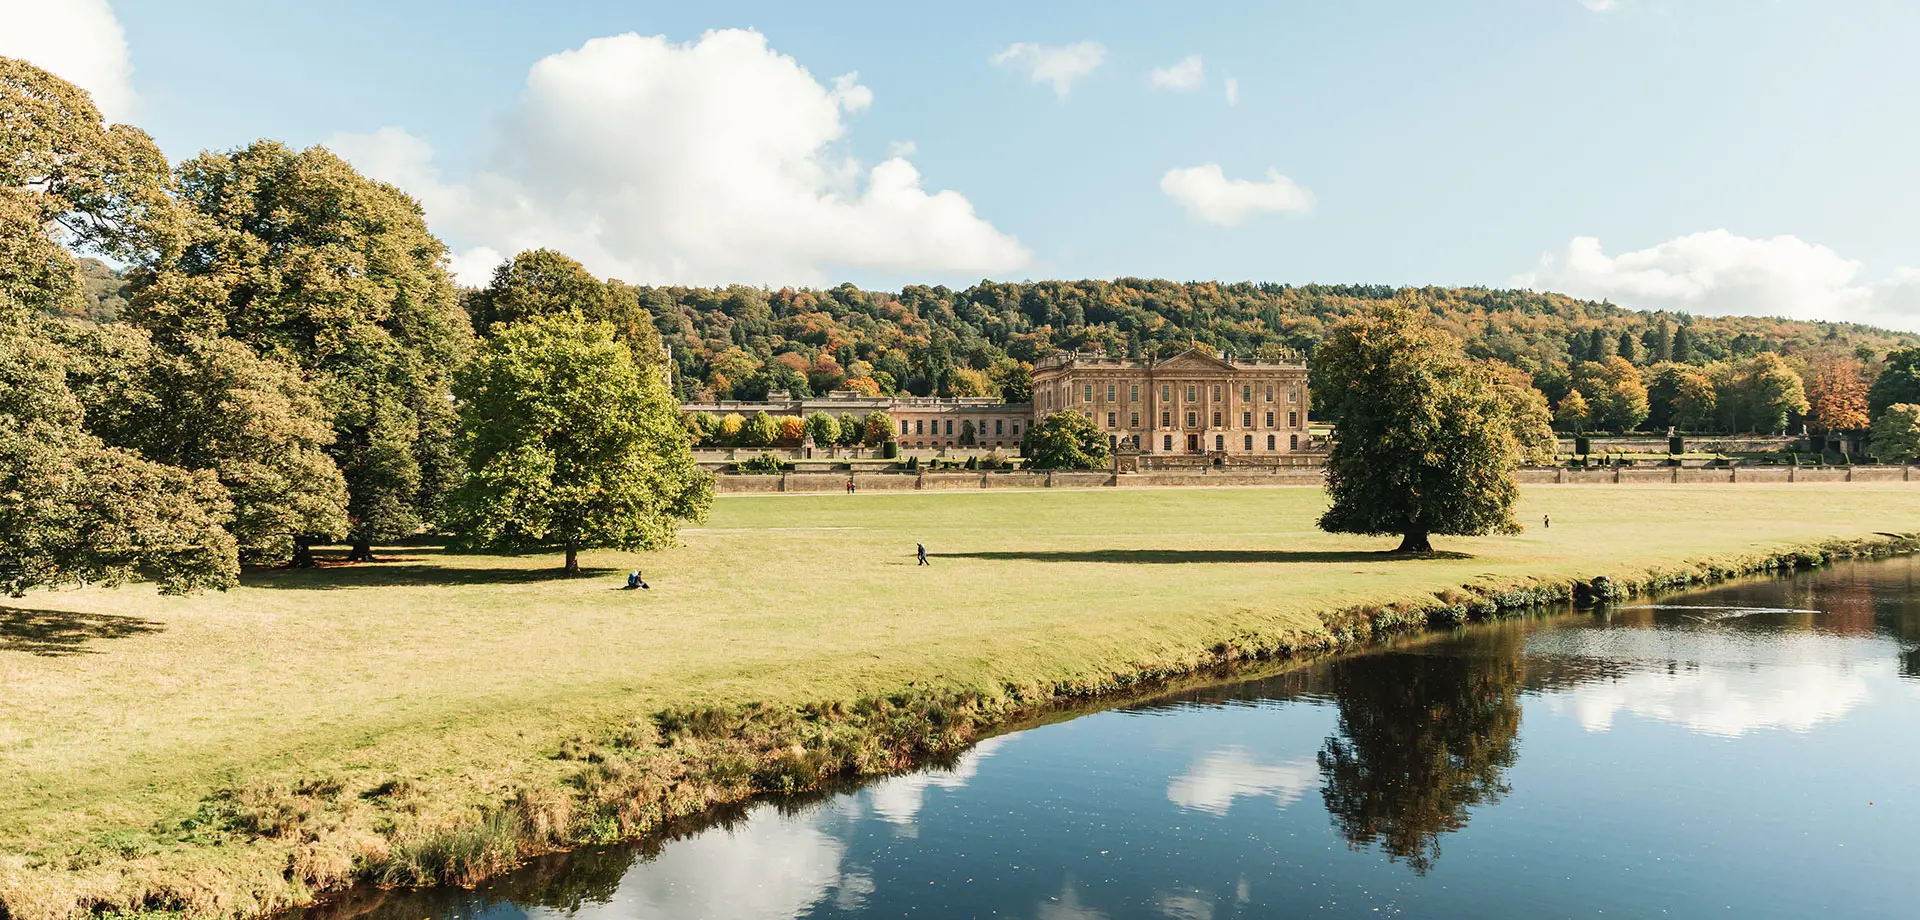 Weddings at Chatsworth in the heart of Derbyshire and the Peak District.